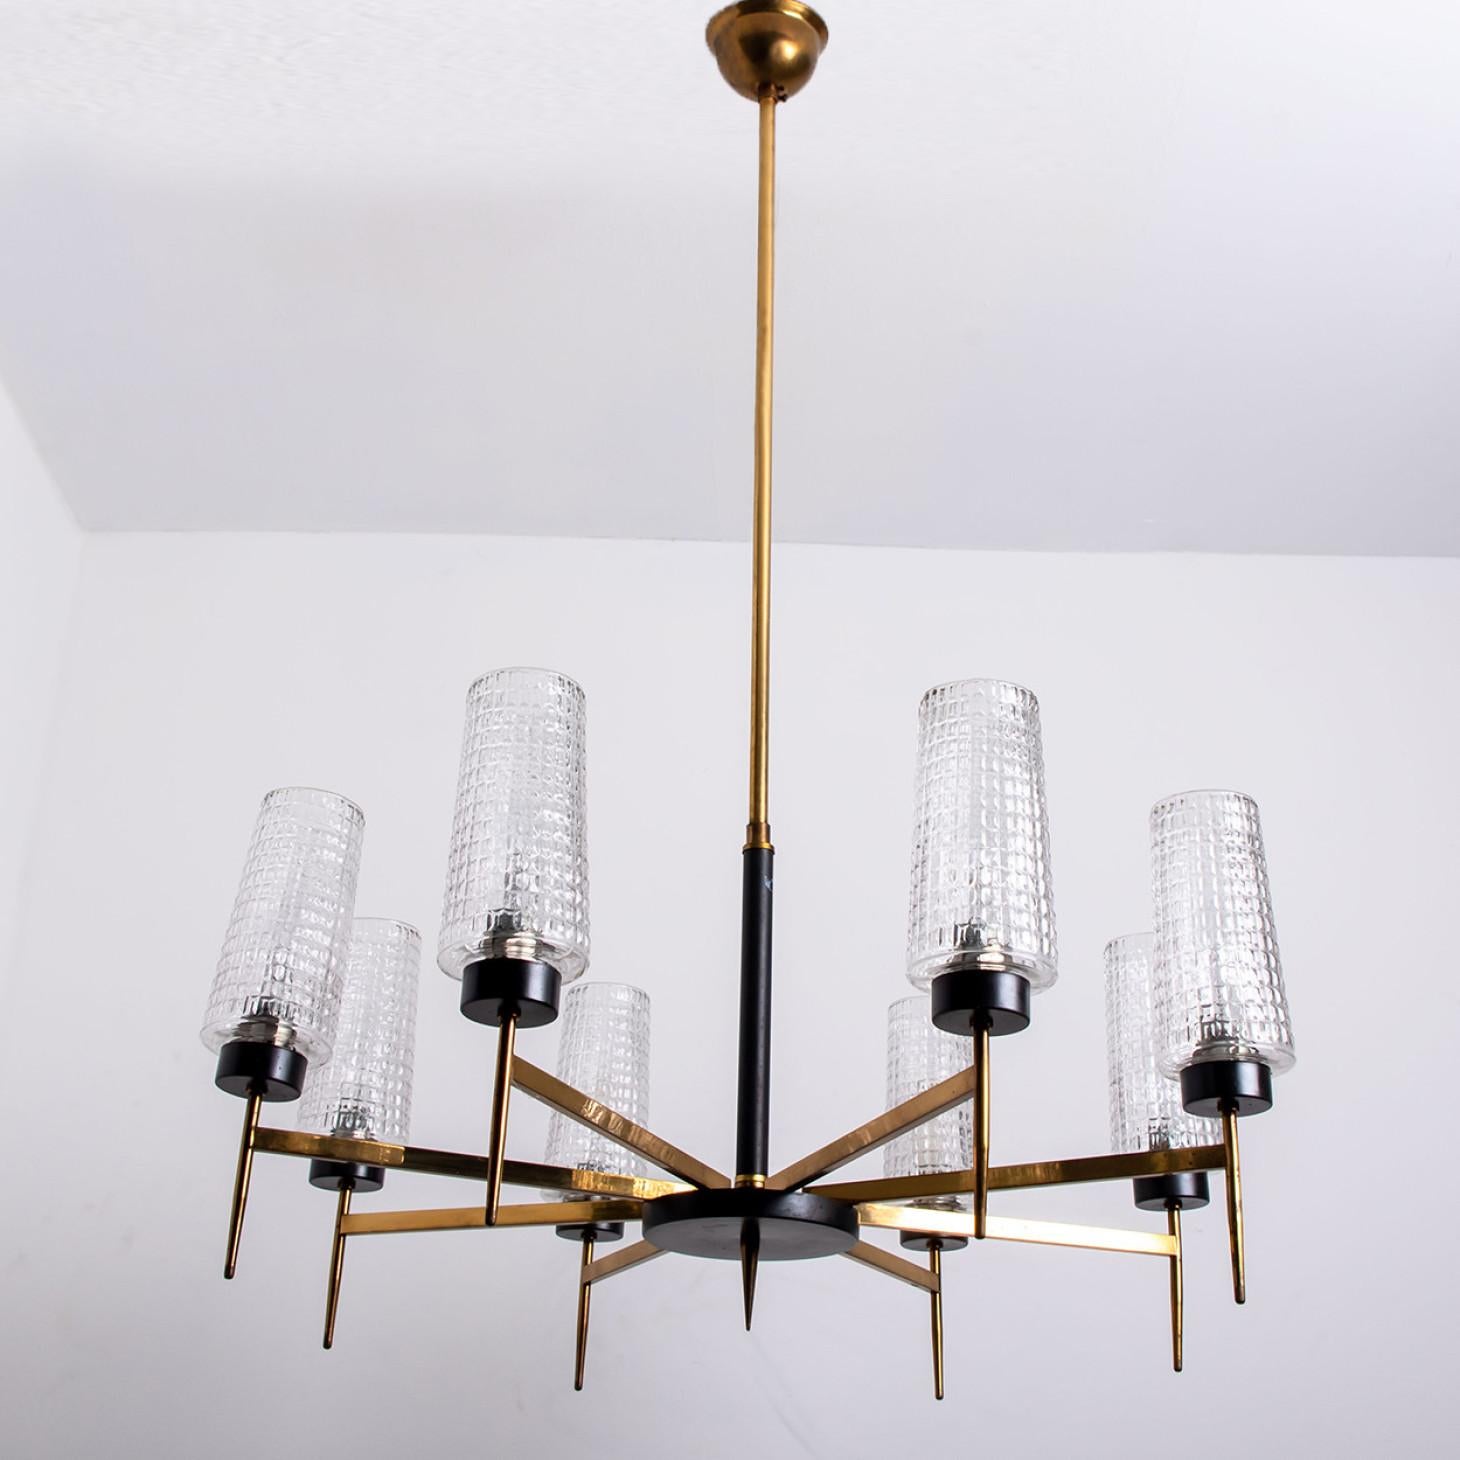 Modernist example of traditional elegance. Quality brass frame in an elegant warm gold color, consisting of eight arms gathering in the middle of the fixture forming a sun pattern.

The 8 waffle pattern glas shades are mounted on a brass and black